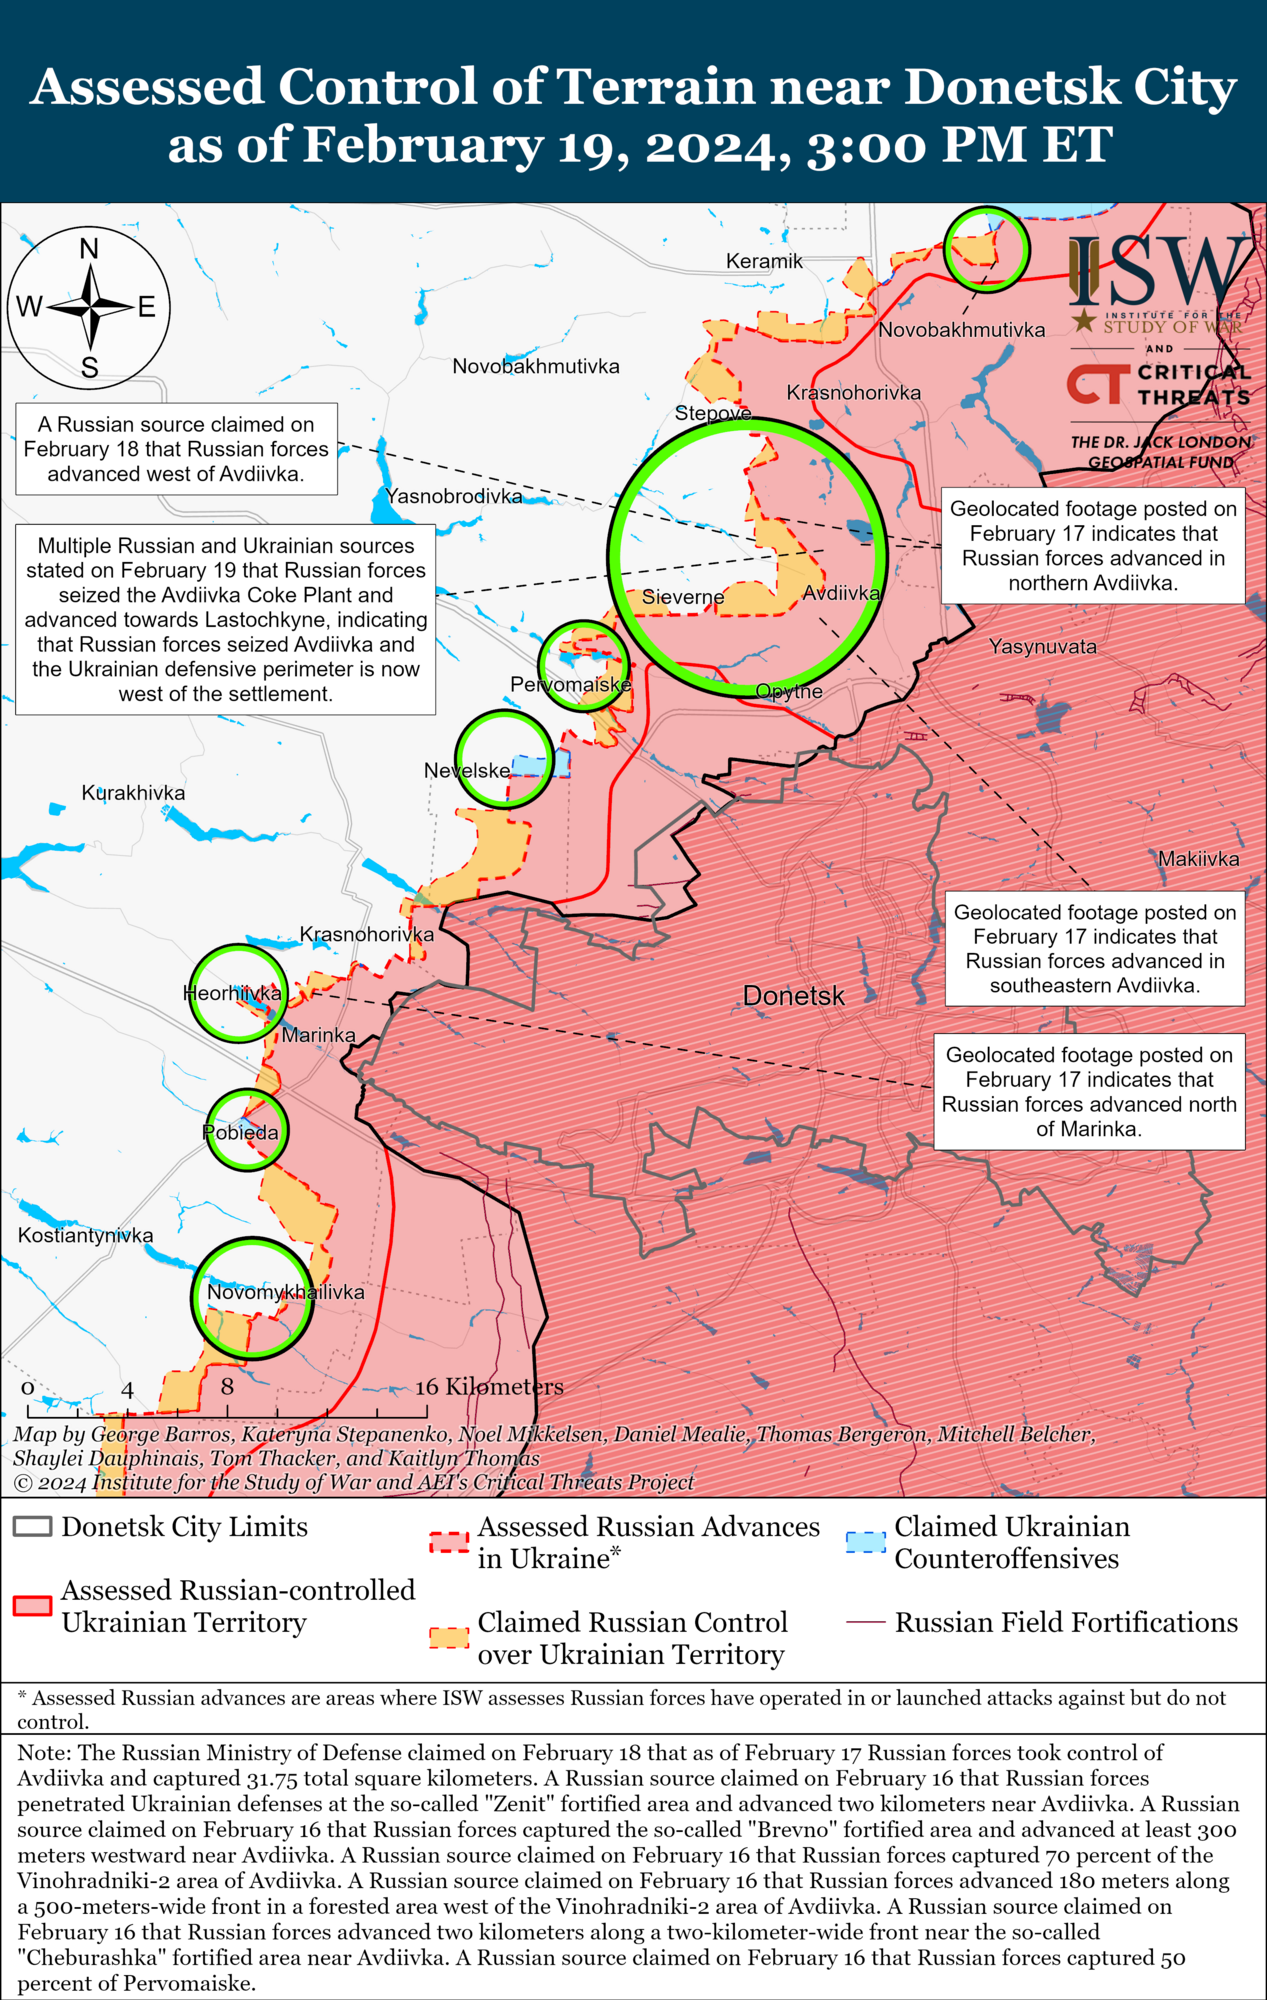 Russia sharply reduced the pace of offensive operations near Avdiivka after capturing the city: ISW explains what is happening. Map